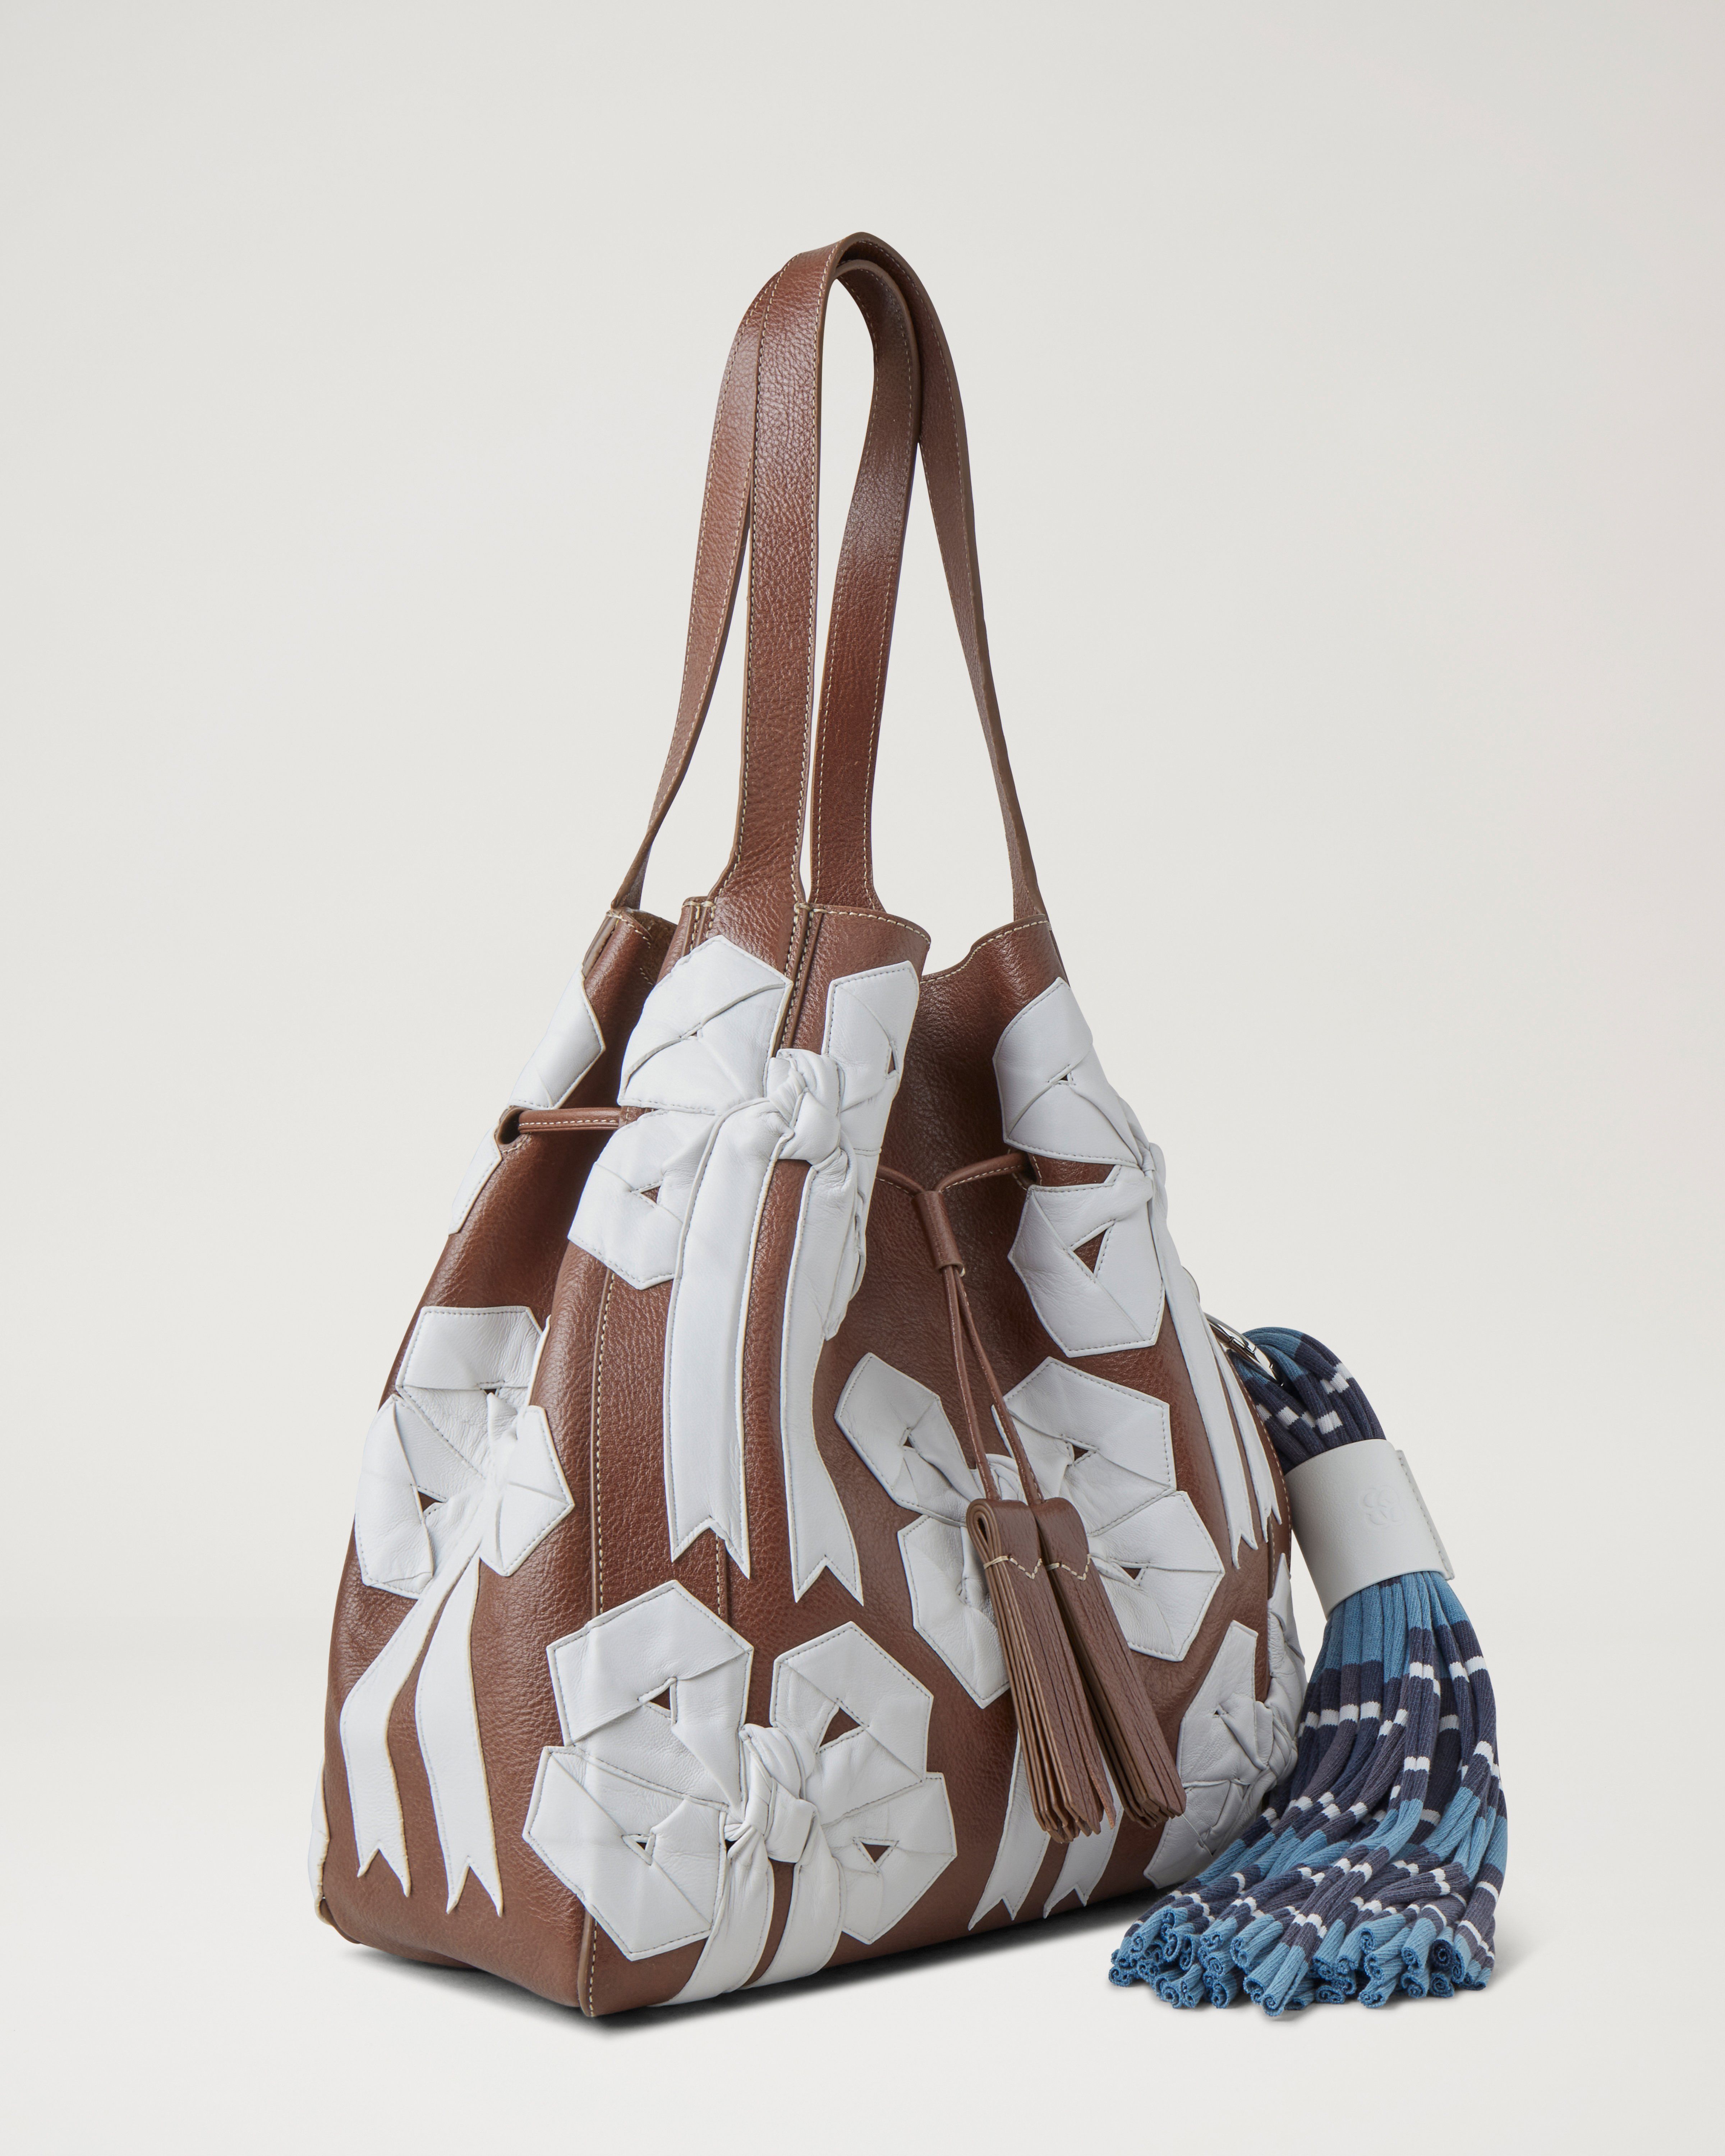 Millie Bow Handbag in Oak Leather from the Mulberry x Stefan Cooke collection